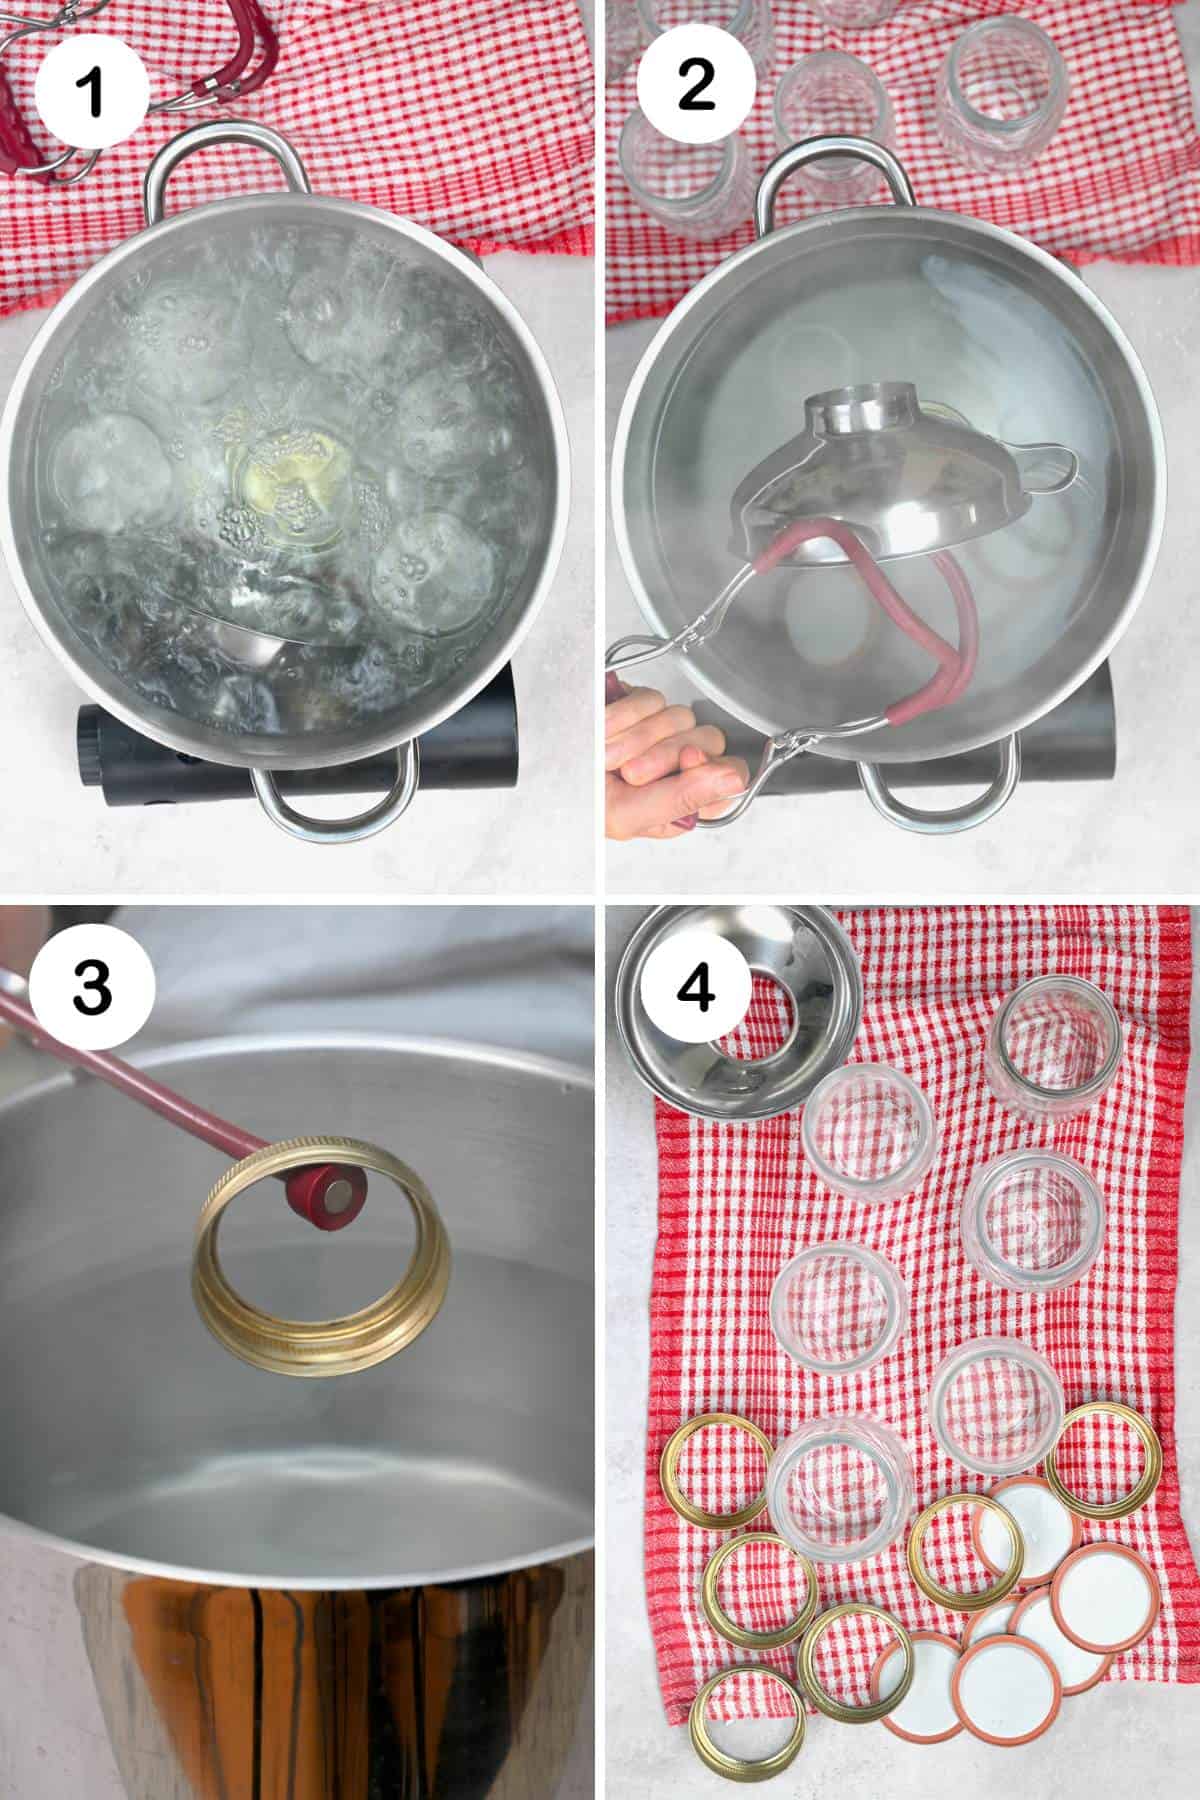 steps for sterilizing the tools and jars for canning whole tomatoes